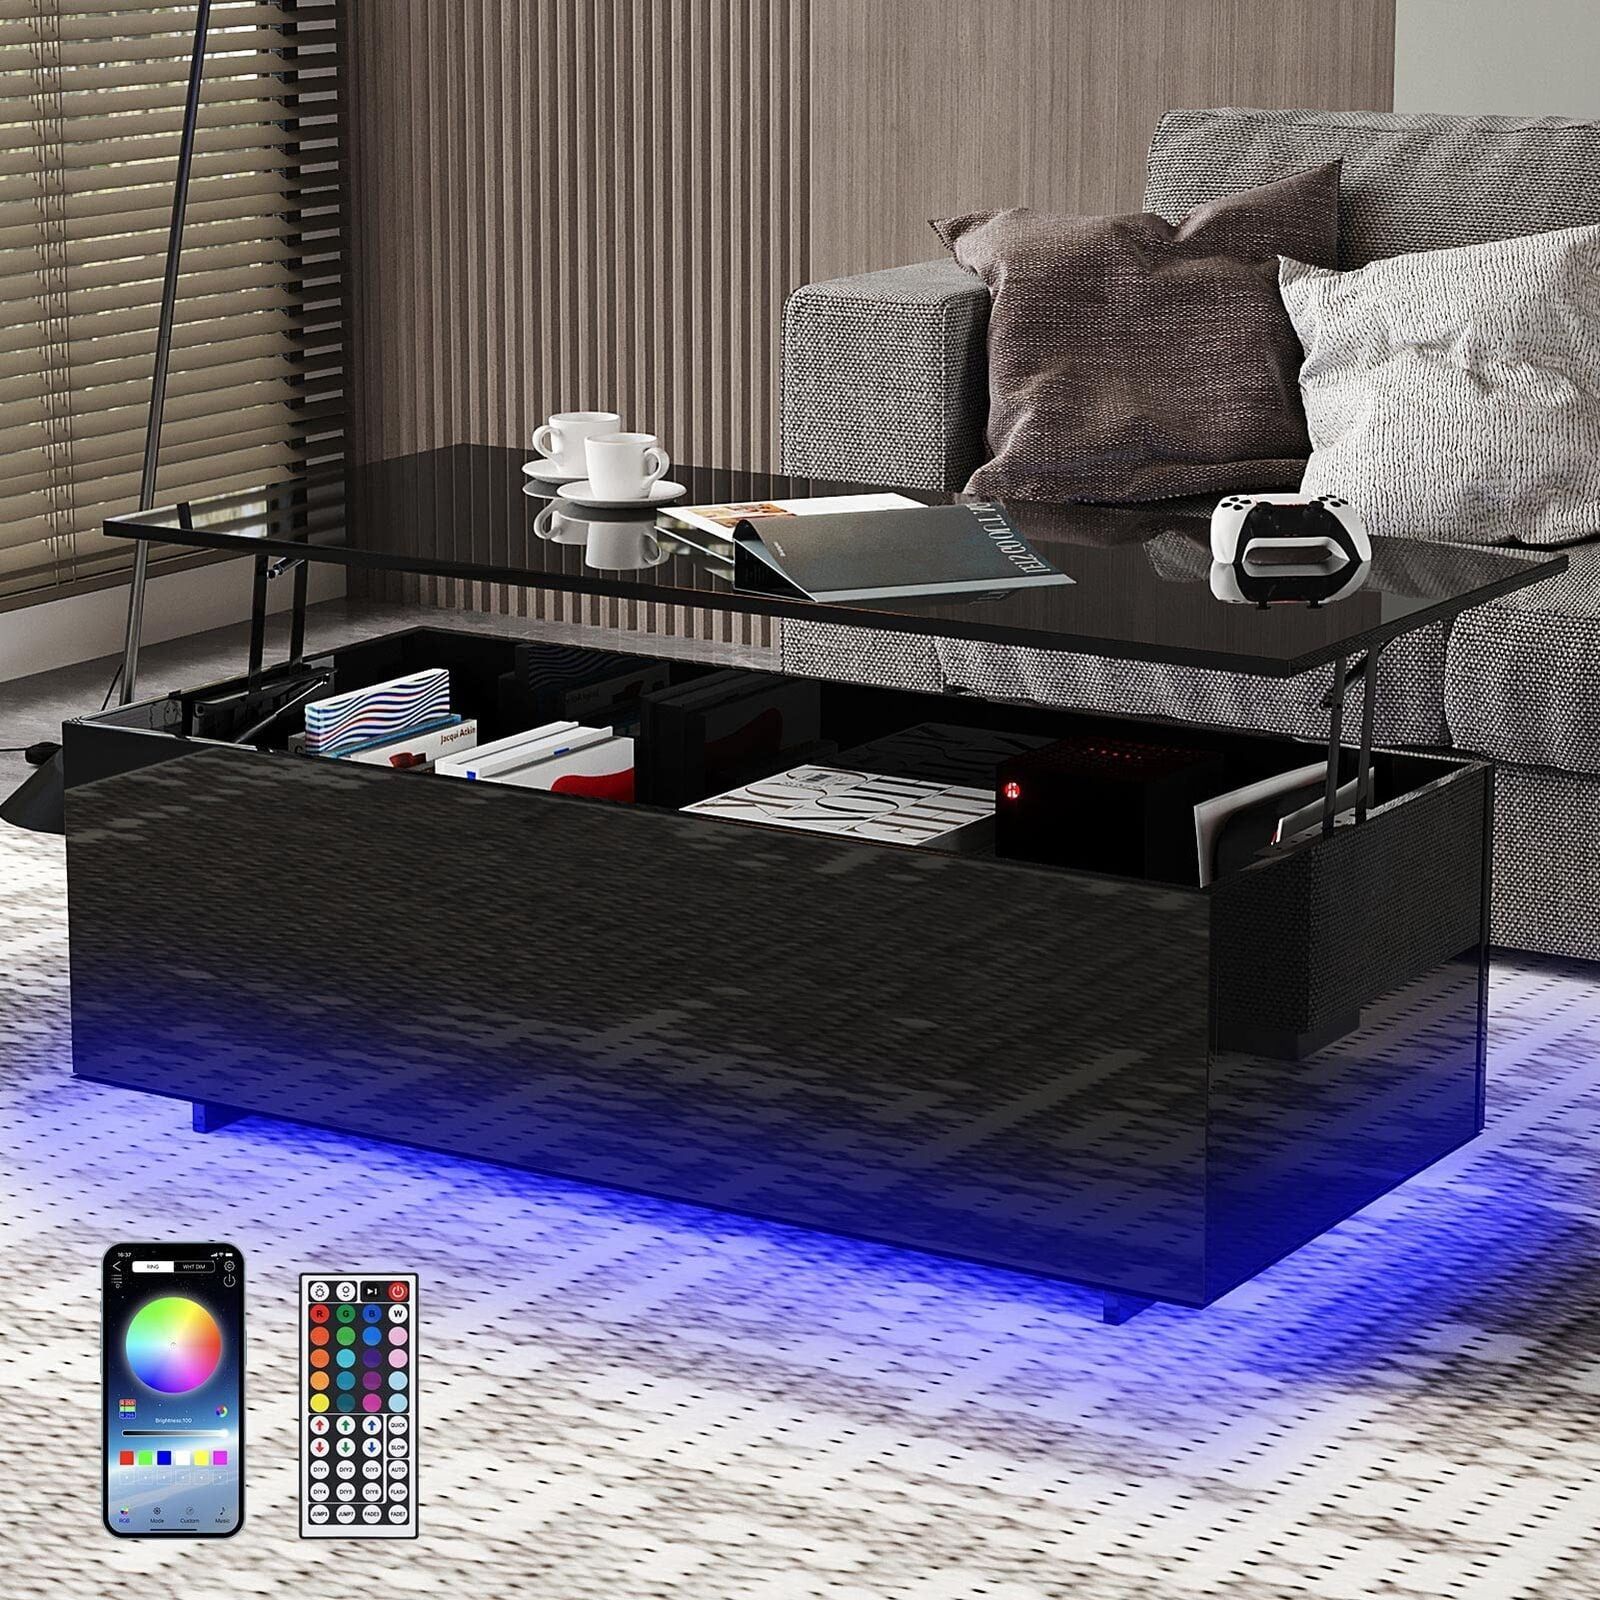 Shiyao 47inch Modern Led Coffee Tables Lift Top With Storage And Hidden  Compartment, High Glossy Coffee Tables With 20 Colors Led Light –  Walmart With Regard To High Gloss Lift Top Coffee Tables (Photo 14 of 15)